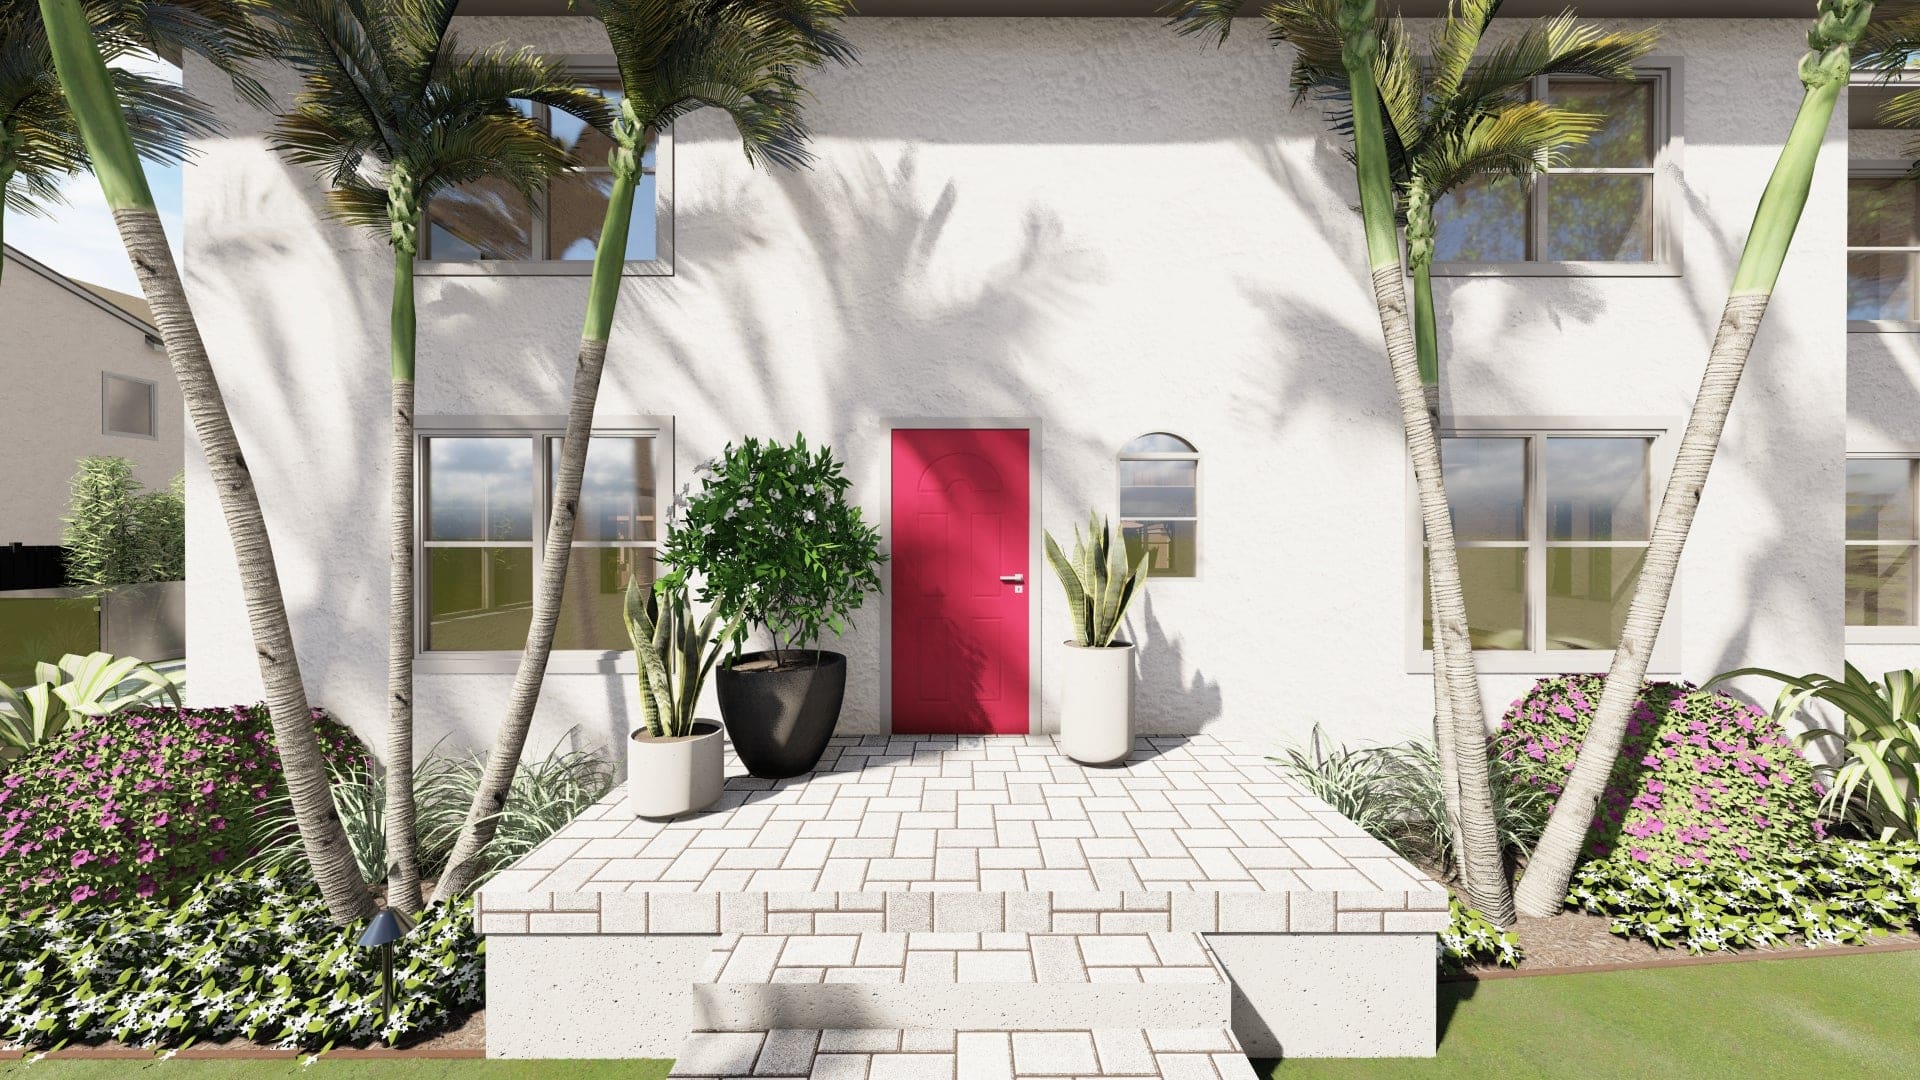 3D design render of front of home with red front door and tropical plantings